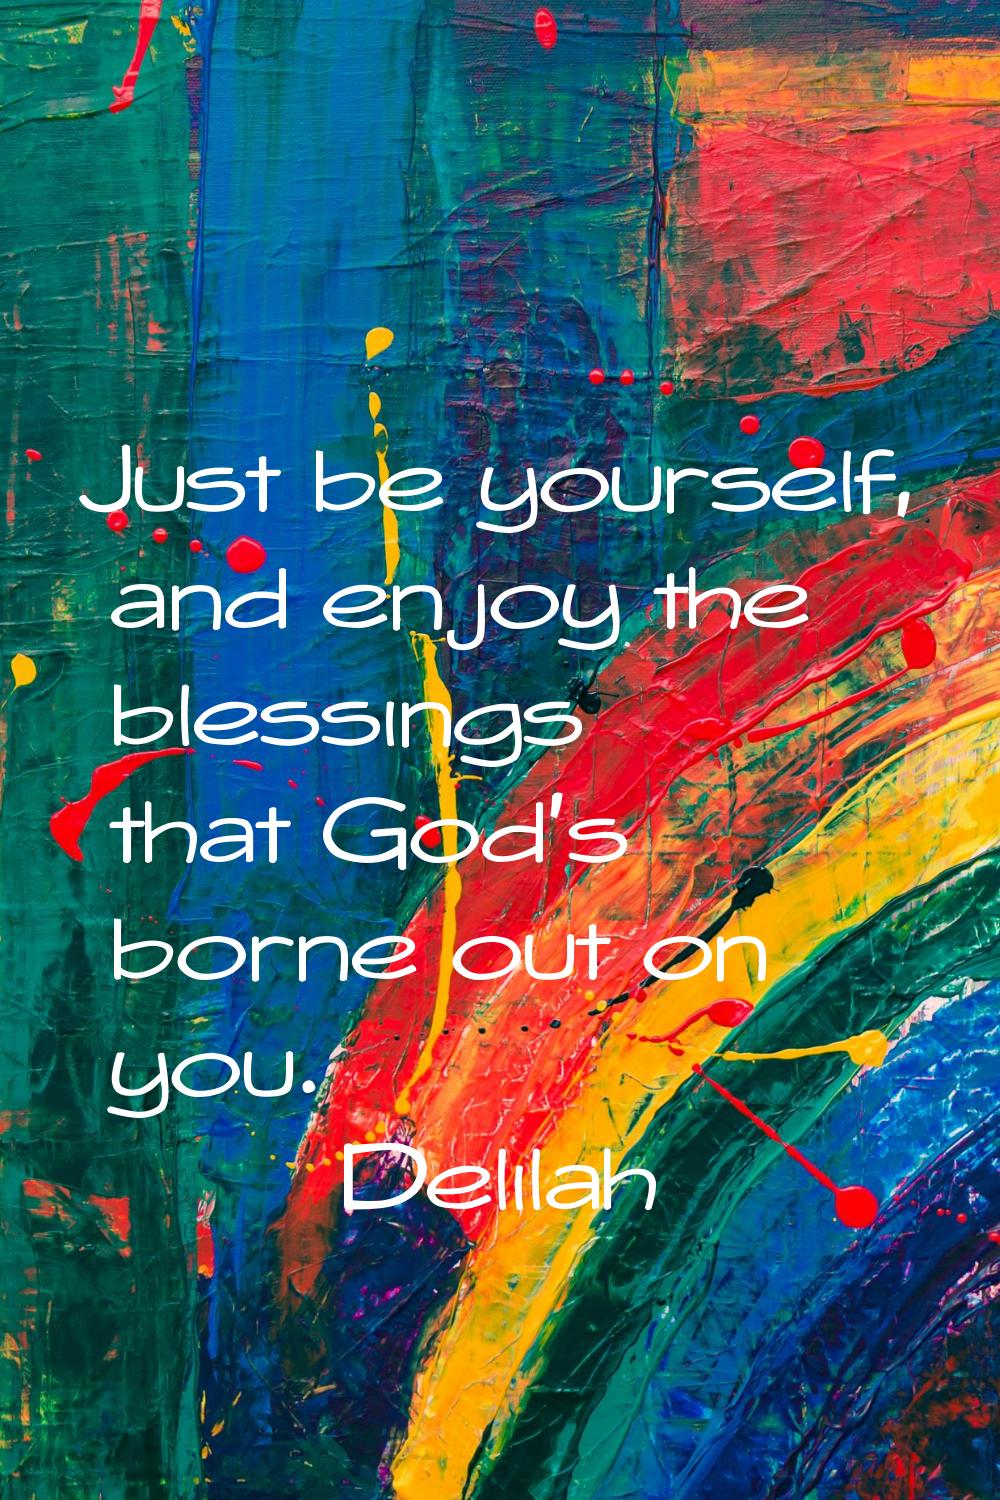 Just be yourself, and enjoy the blessings that God's borne out on you.